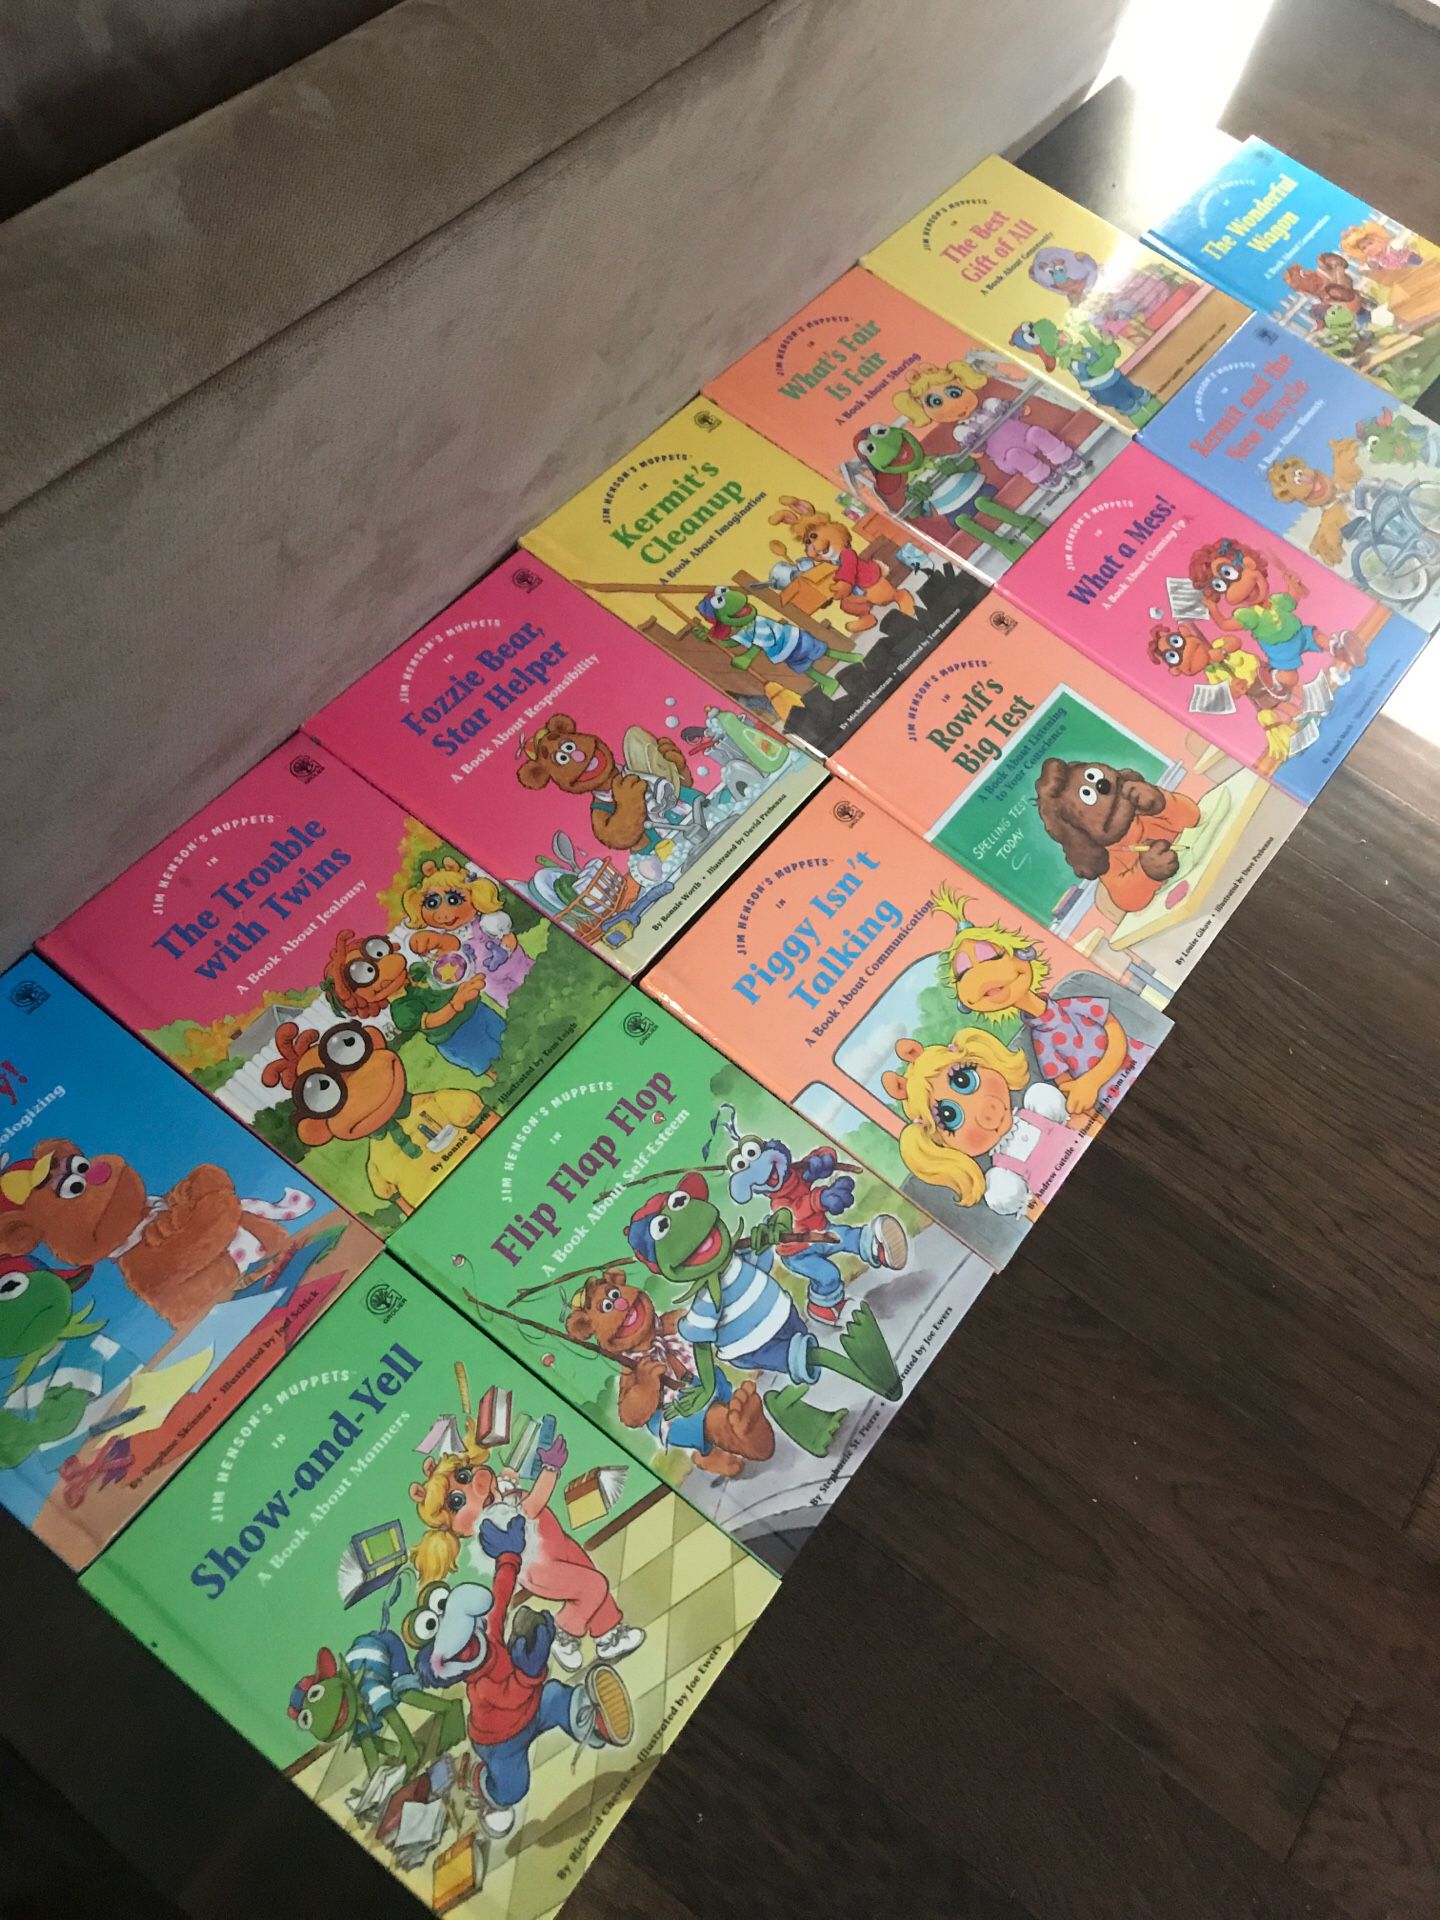 The muppets kids books